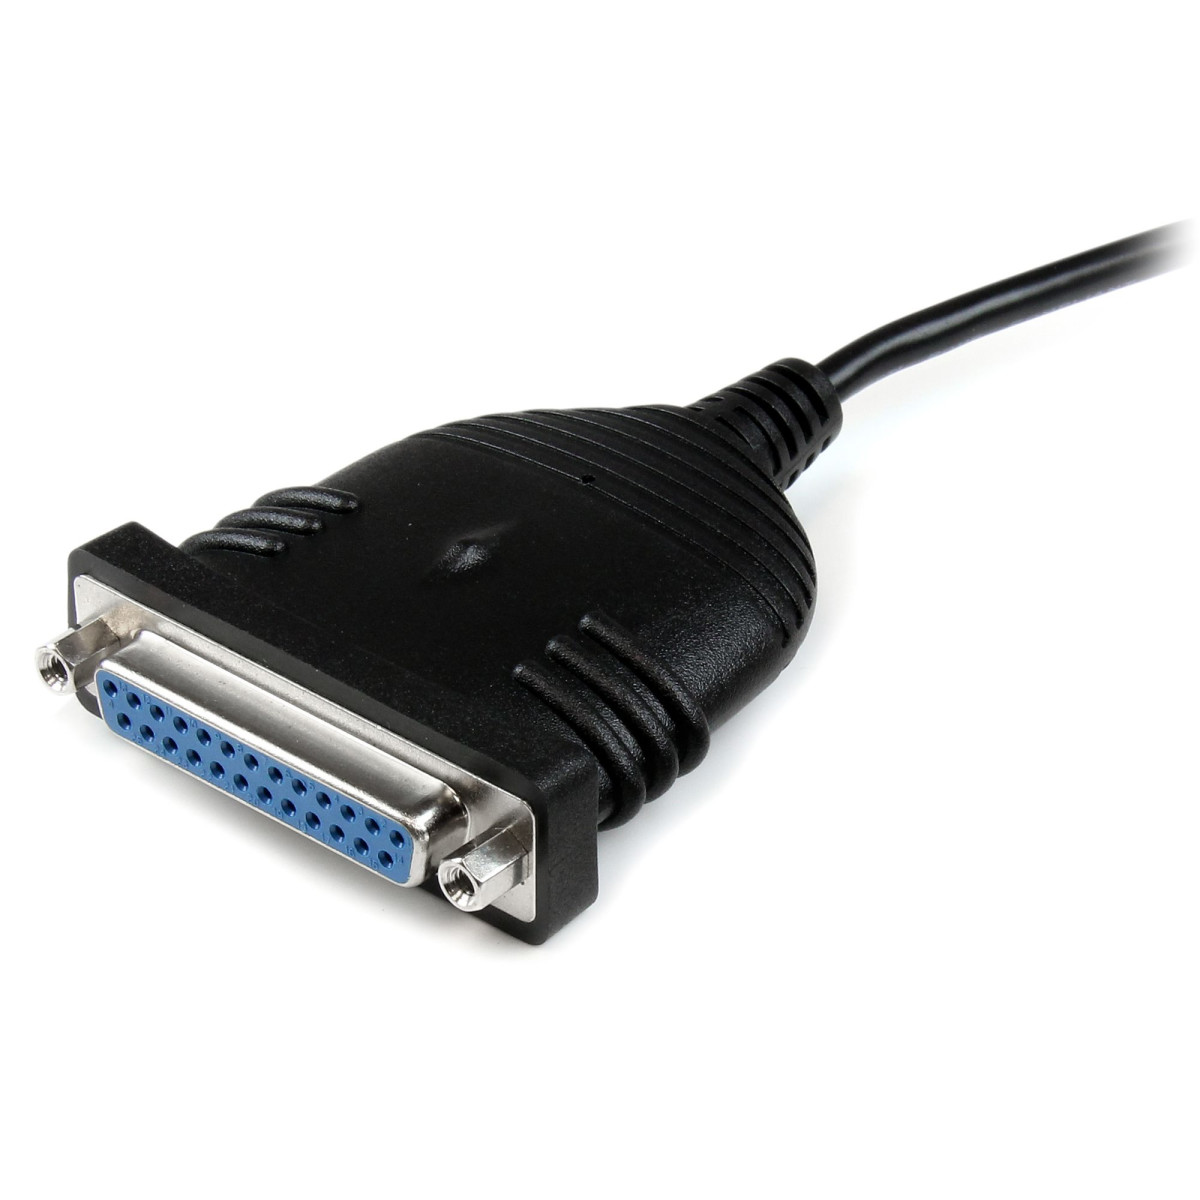 6ft USB-Parallel Printer Adapter Cable